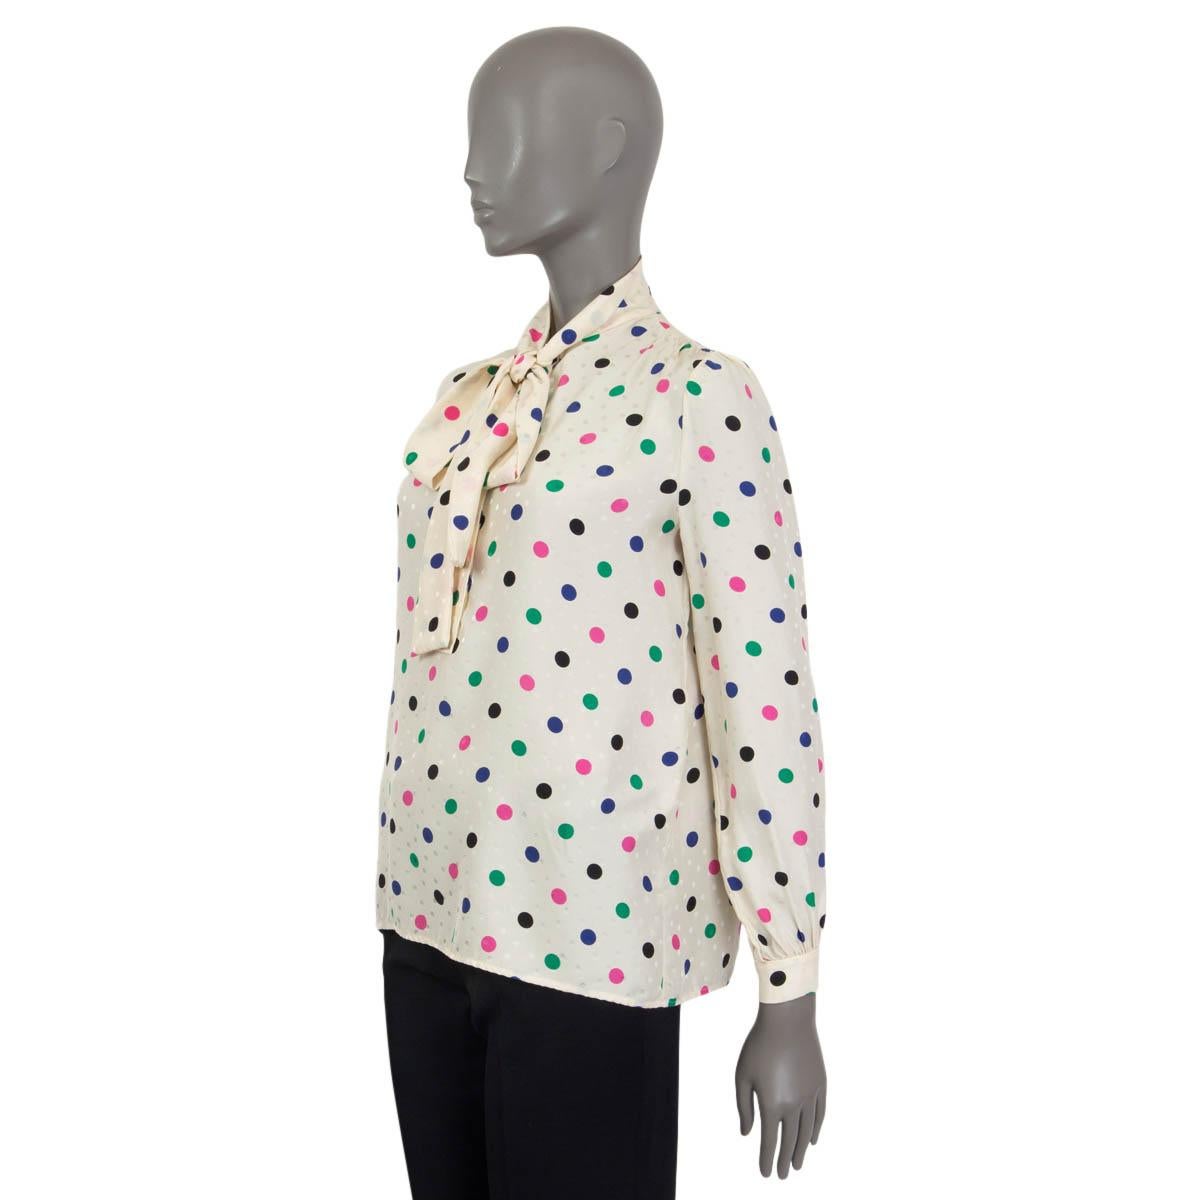 Gray SAINT LAURENT ivory & multicolor silk DOTTED PUSSY BOW Blouse Shirt 36 XS For Sale